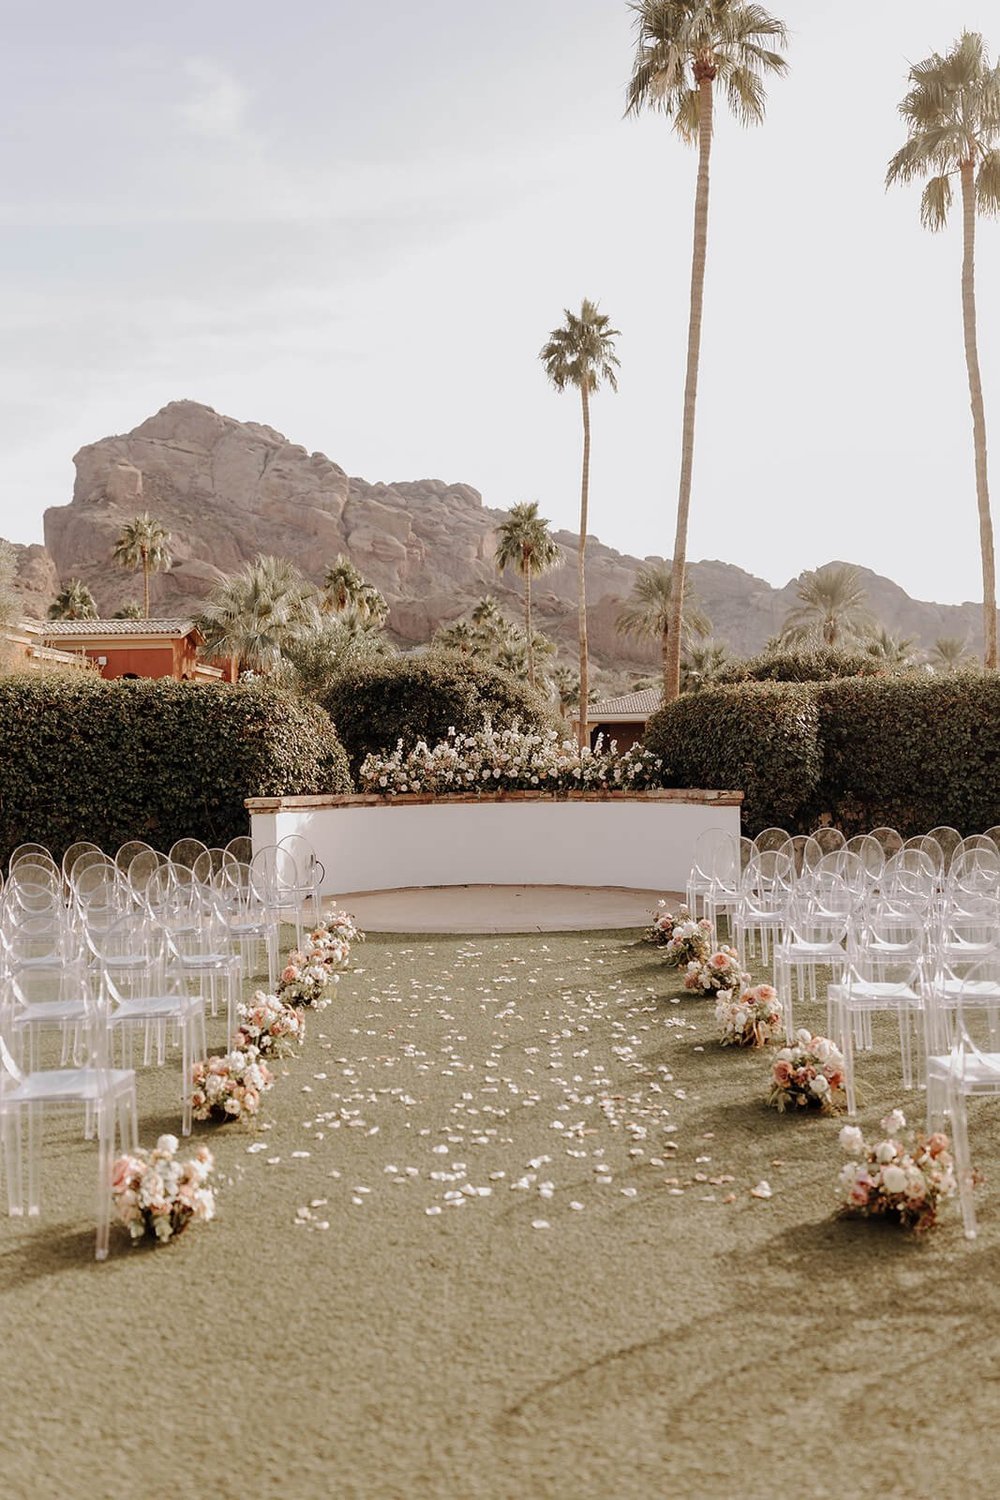 Ceremony lawn with mountains and palm trees in background at luxury Scottsdale wedding